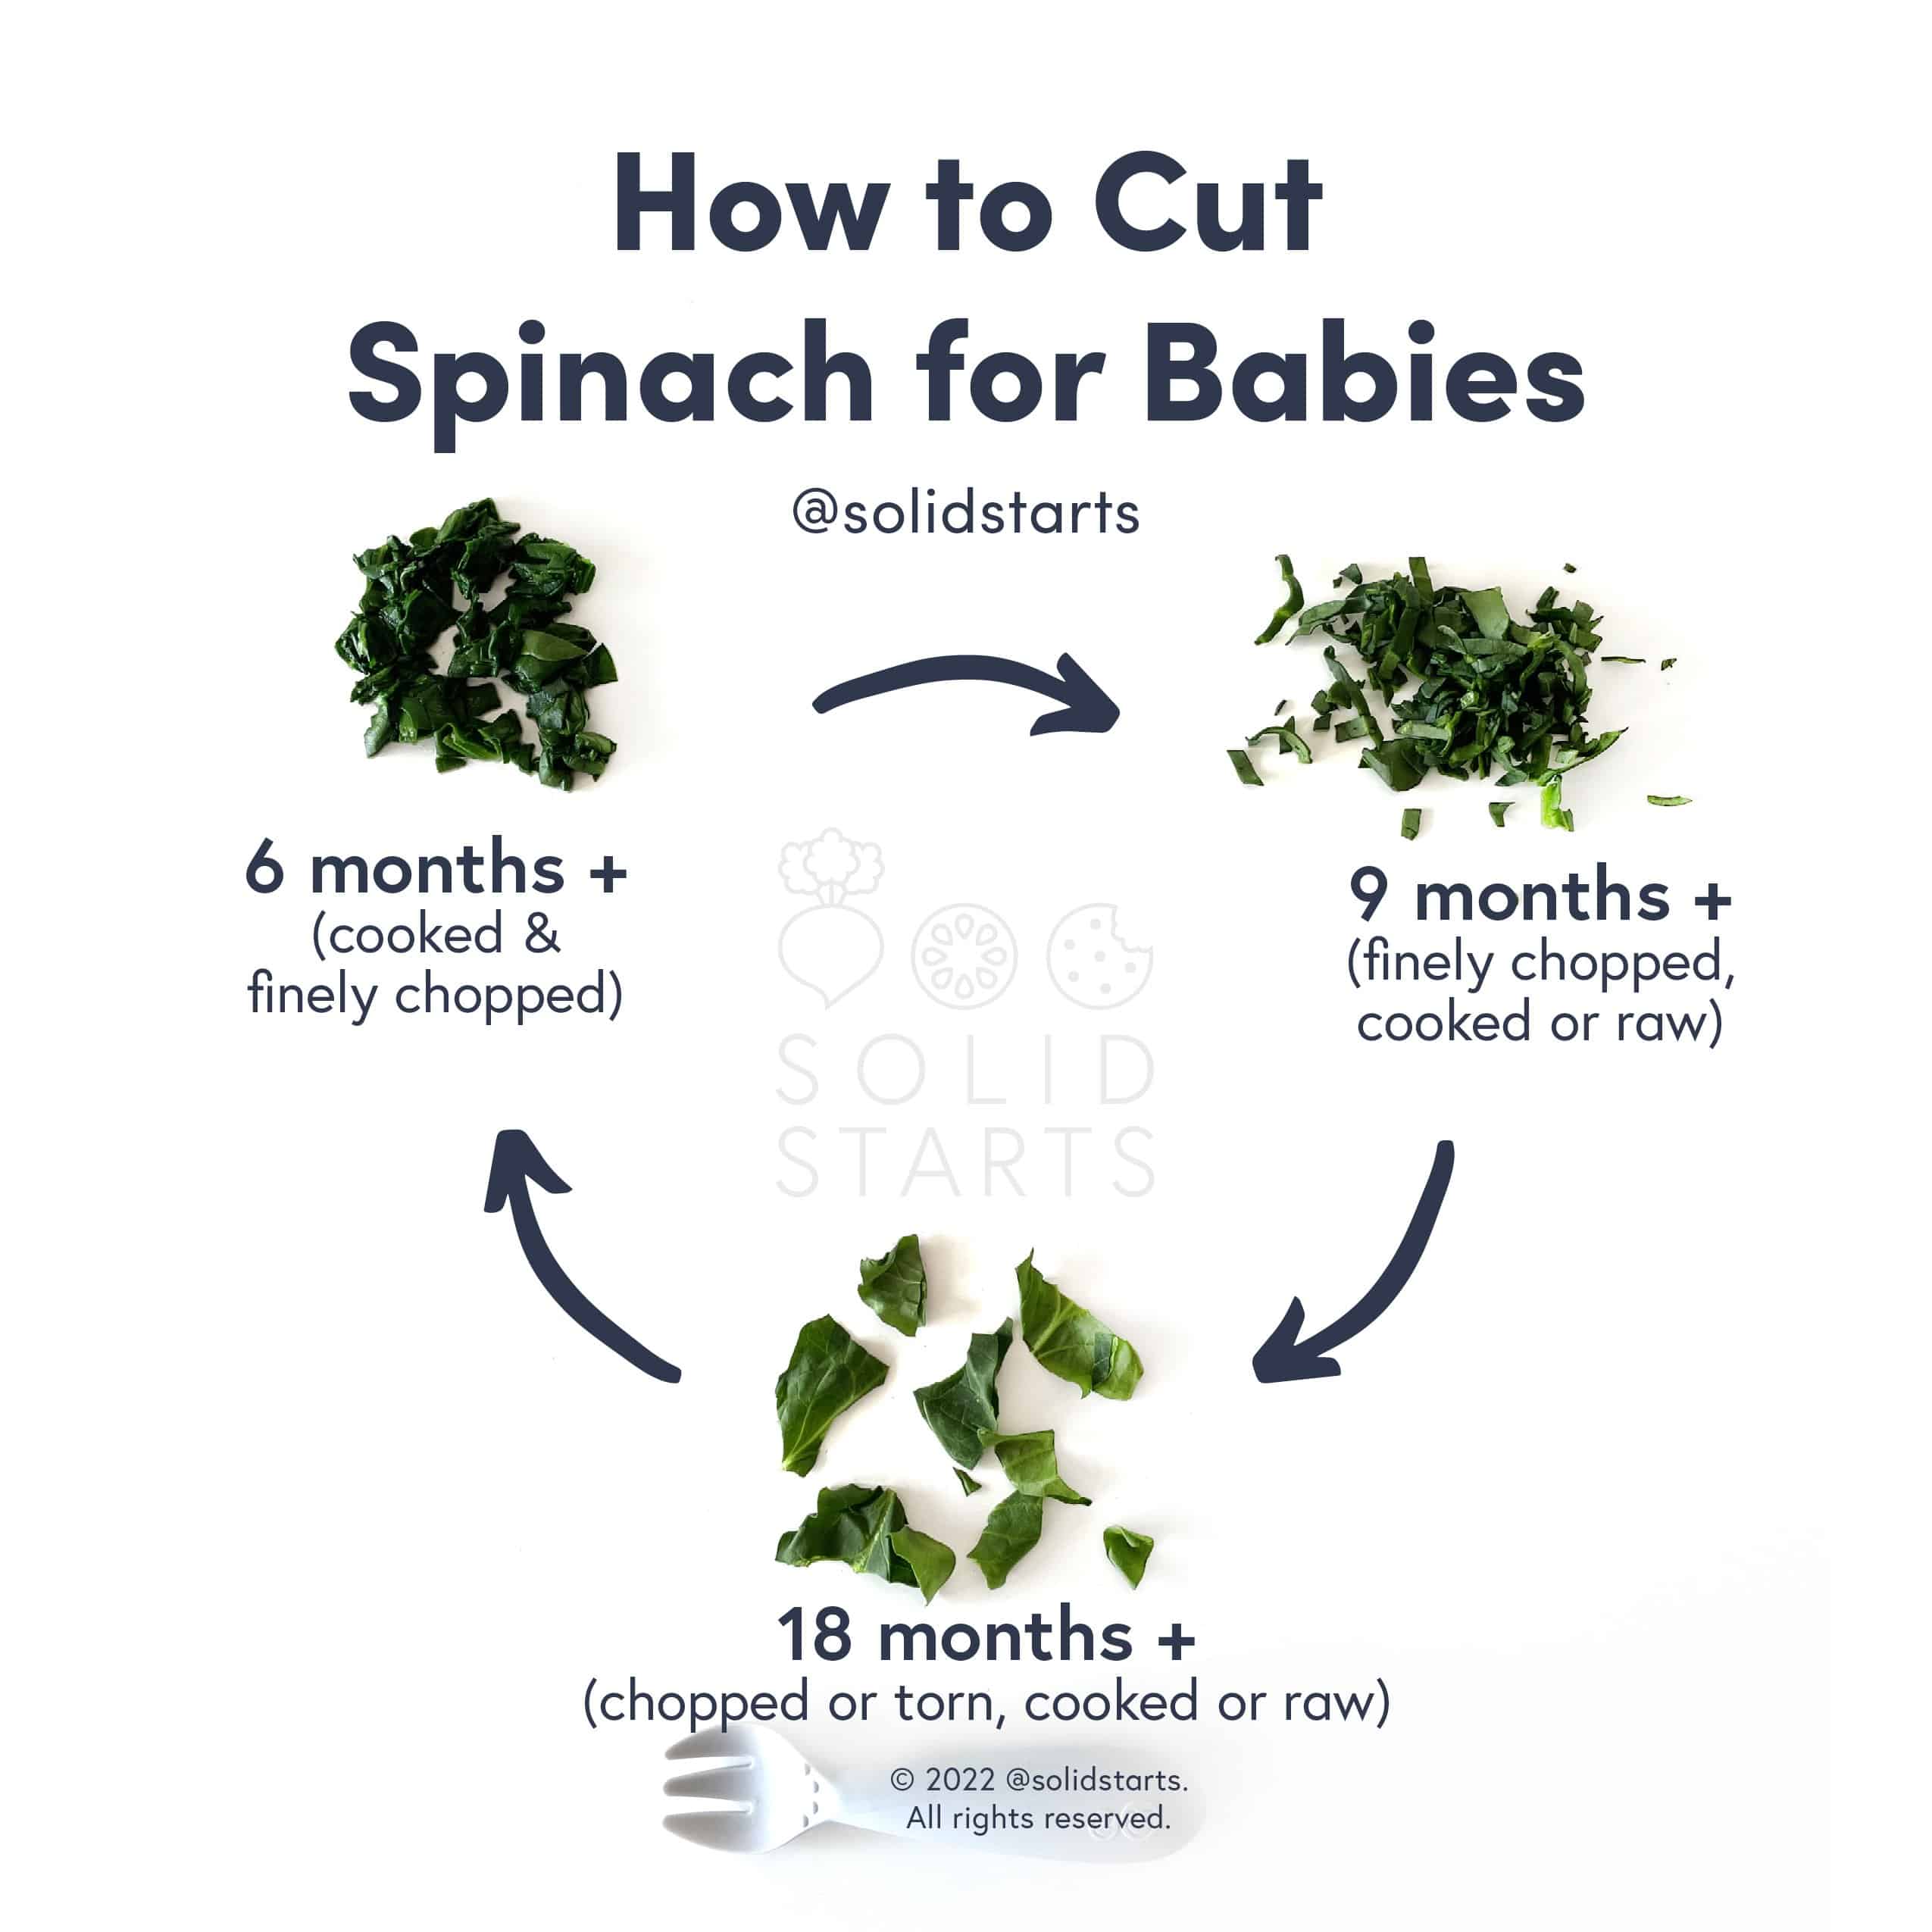 How to Cut Spinach for Babies